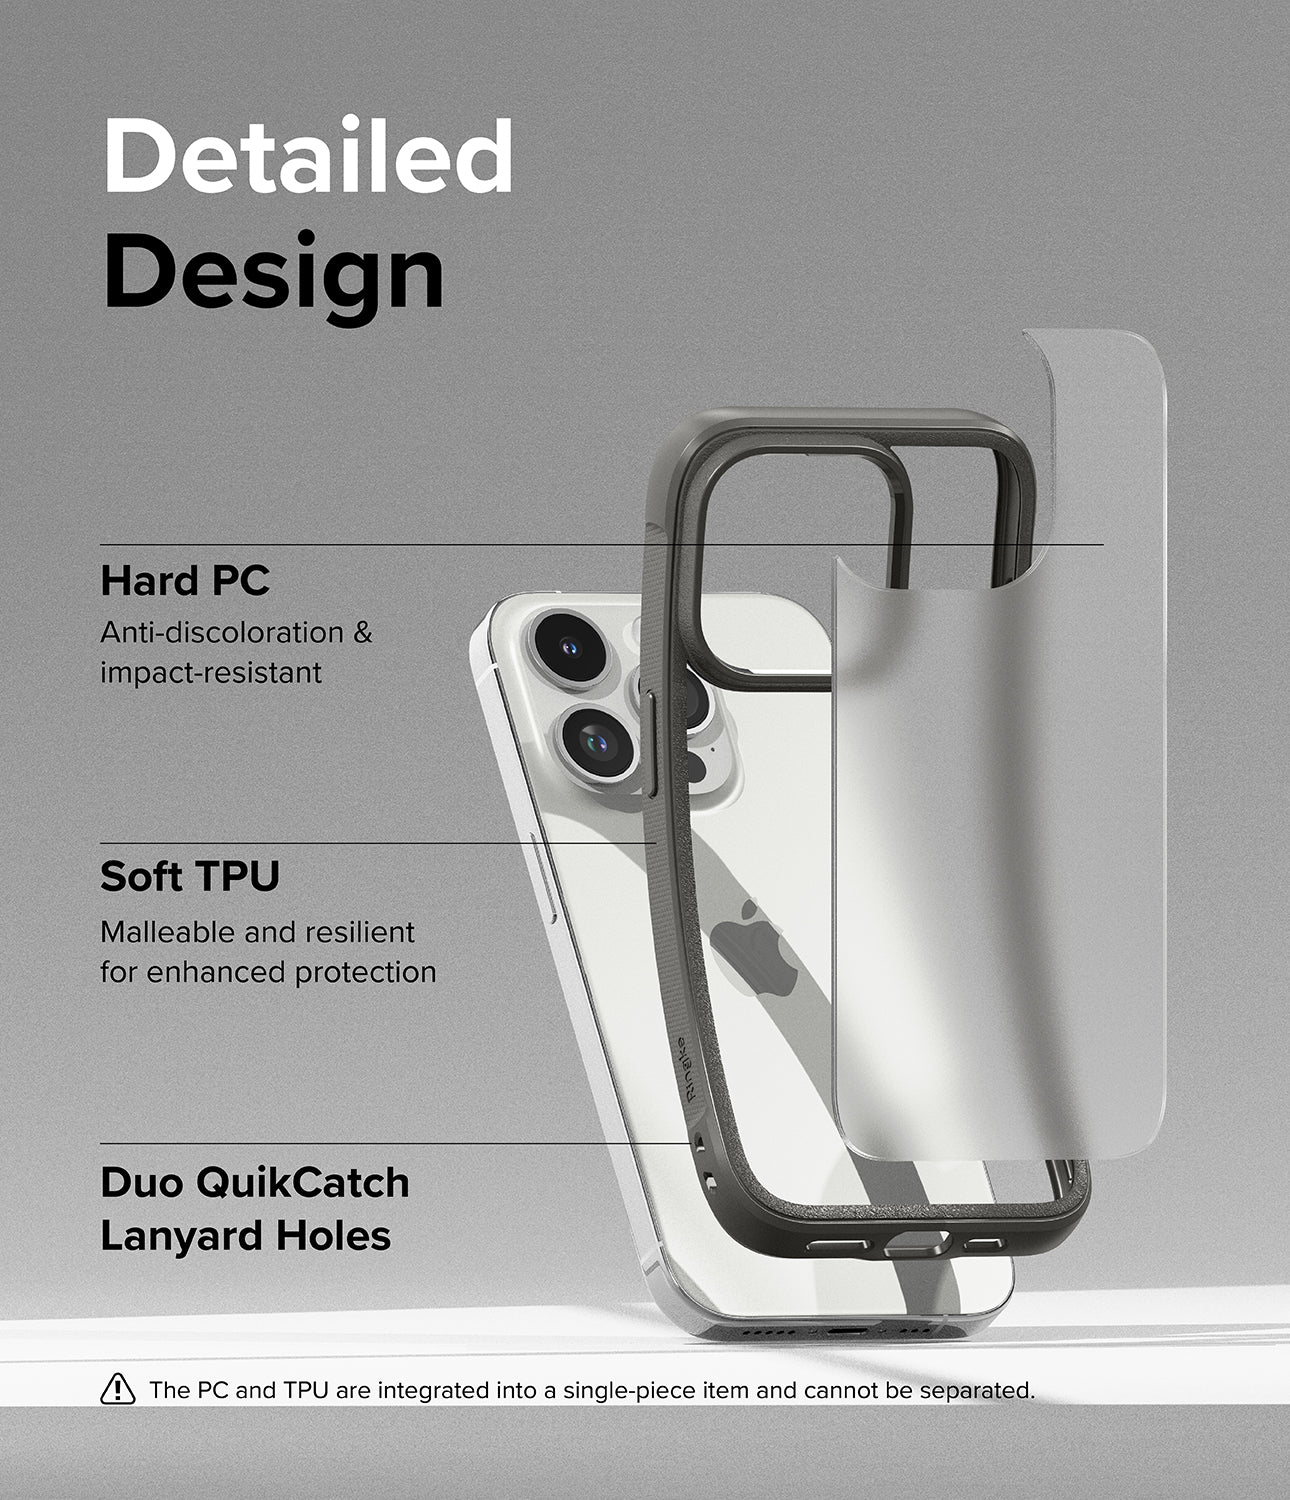 iPhone 15 Pro Case | Fusion Bold - Matte/Gray - Detailed Design. Anti-discoloration and impact-resistant with Hard PC. Malleable and resilient for enhanced protection with Soft TPU. Duo QuikCatch Lanyard Holes.